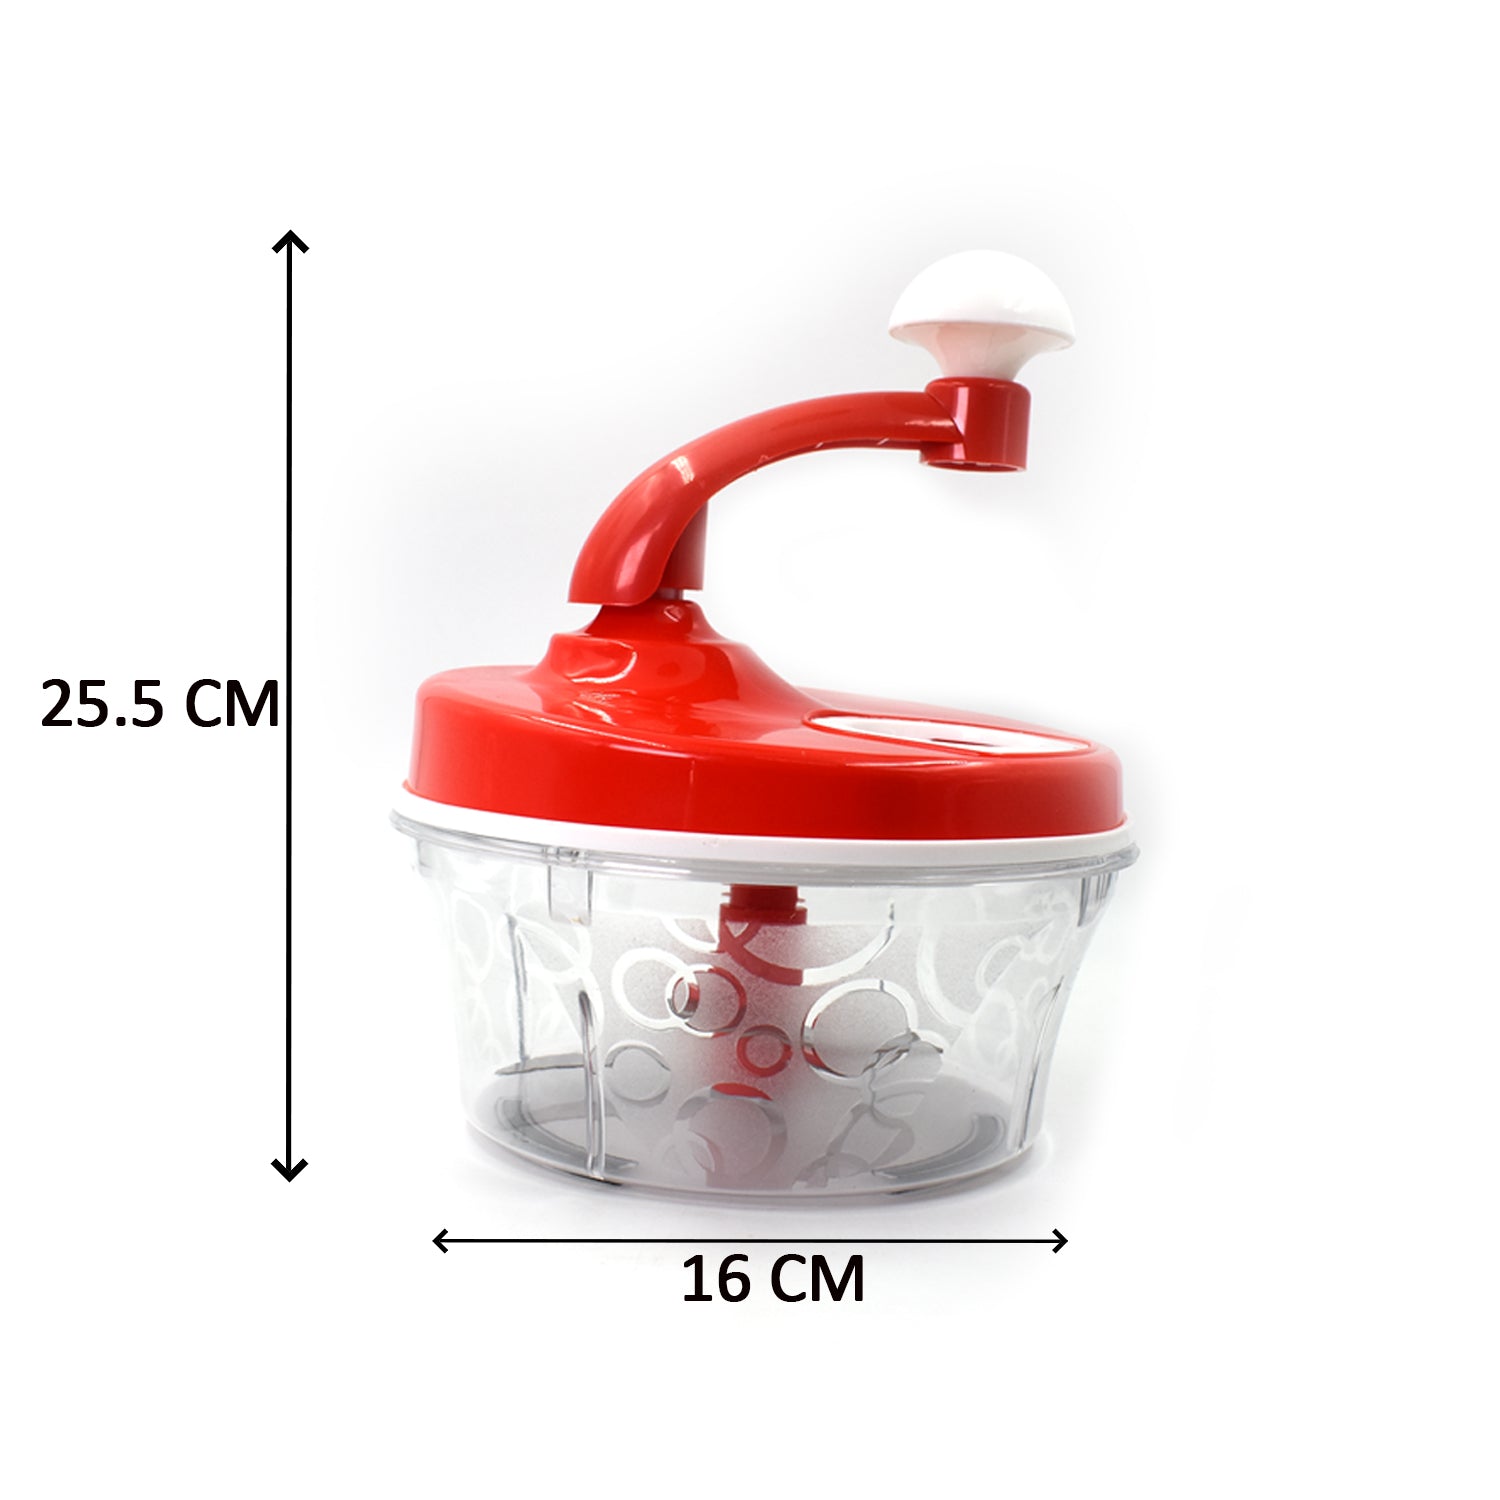 2721 10 in 1 Food Processor widely used in all kinds of household purposes for making the process of food easy and feasible with the help of these supplements and equipments etc.